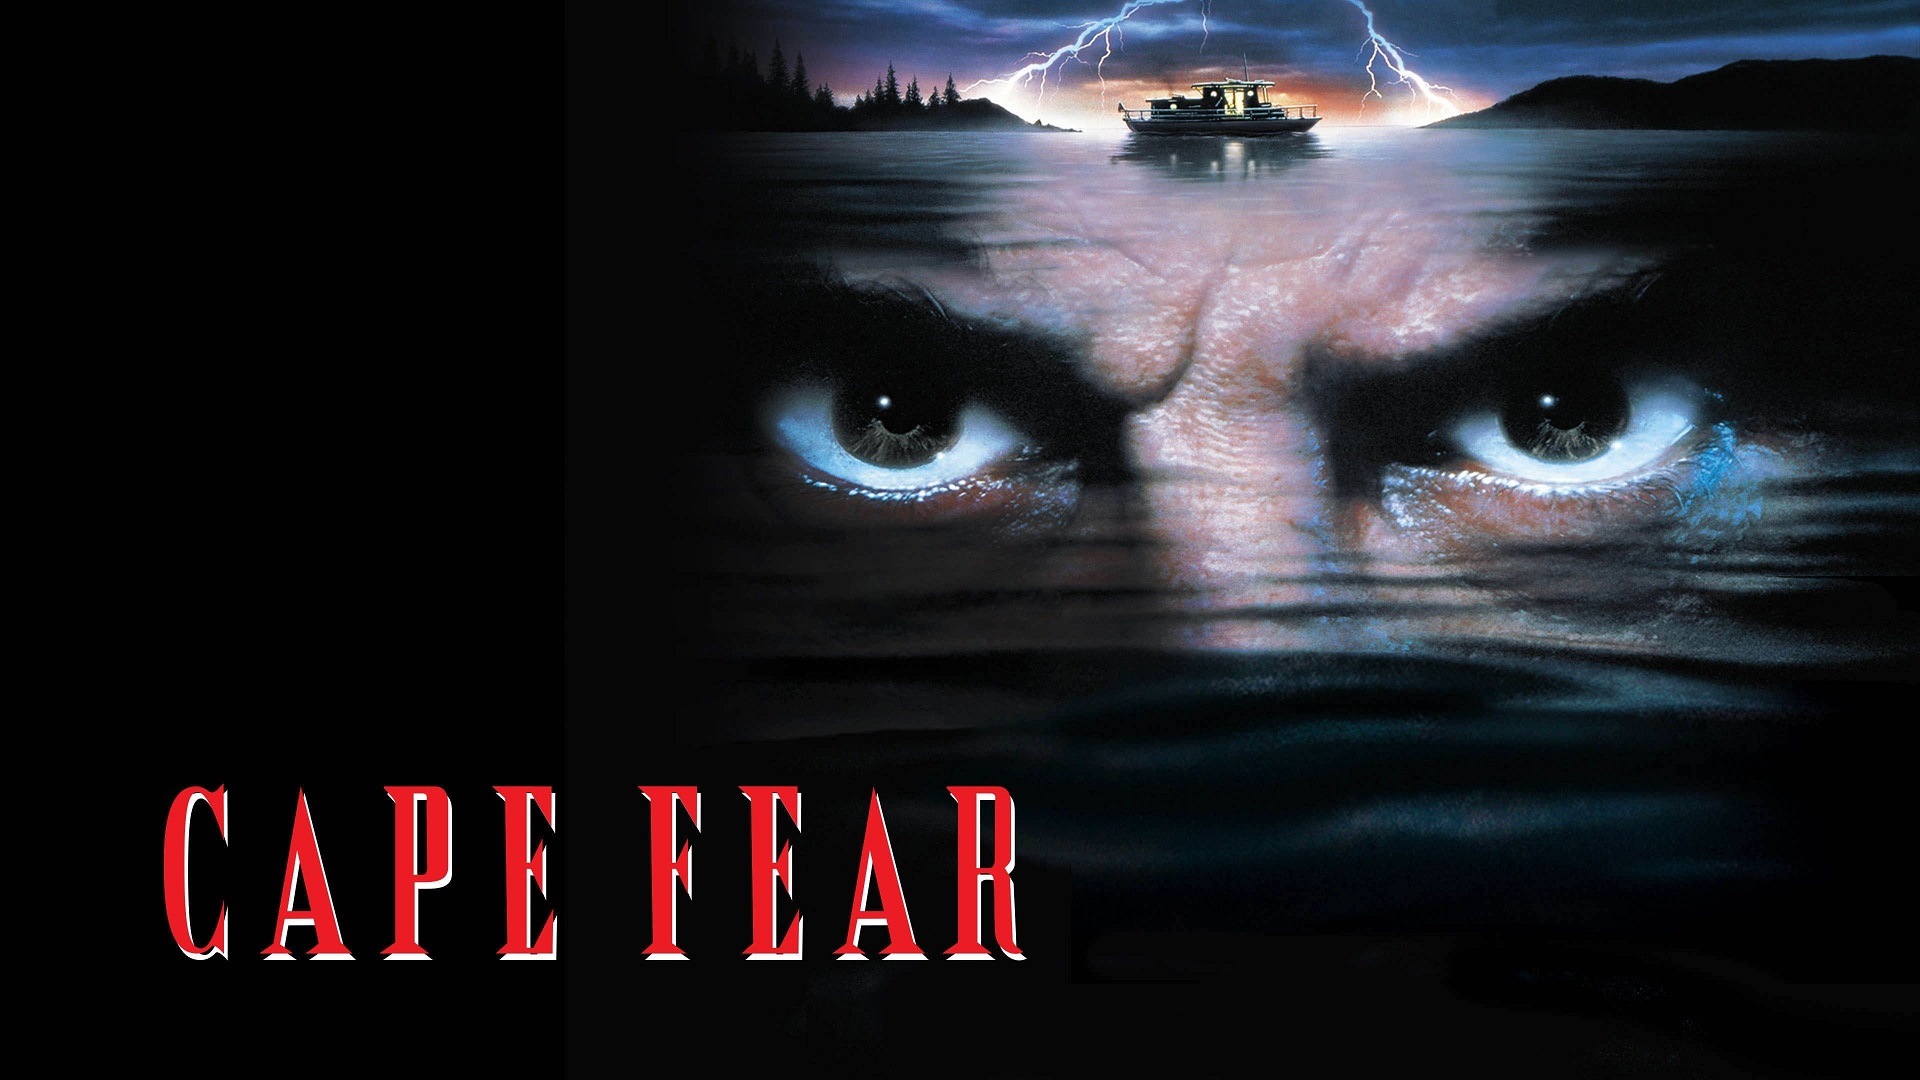 cheyenne blackmon recommends cape fear movie online pic